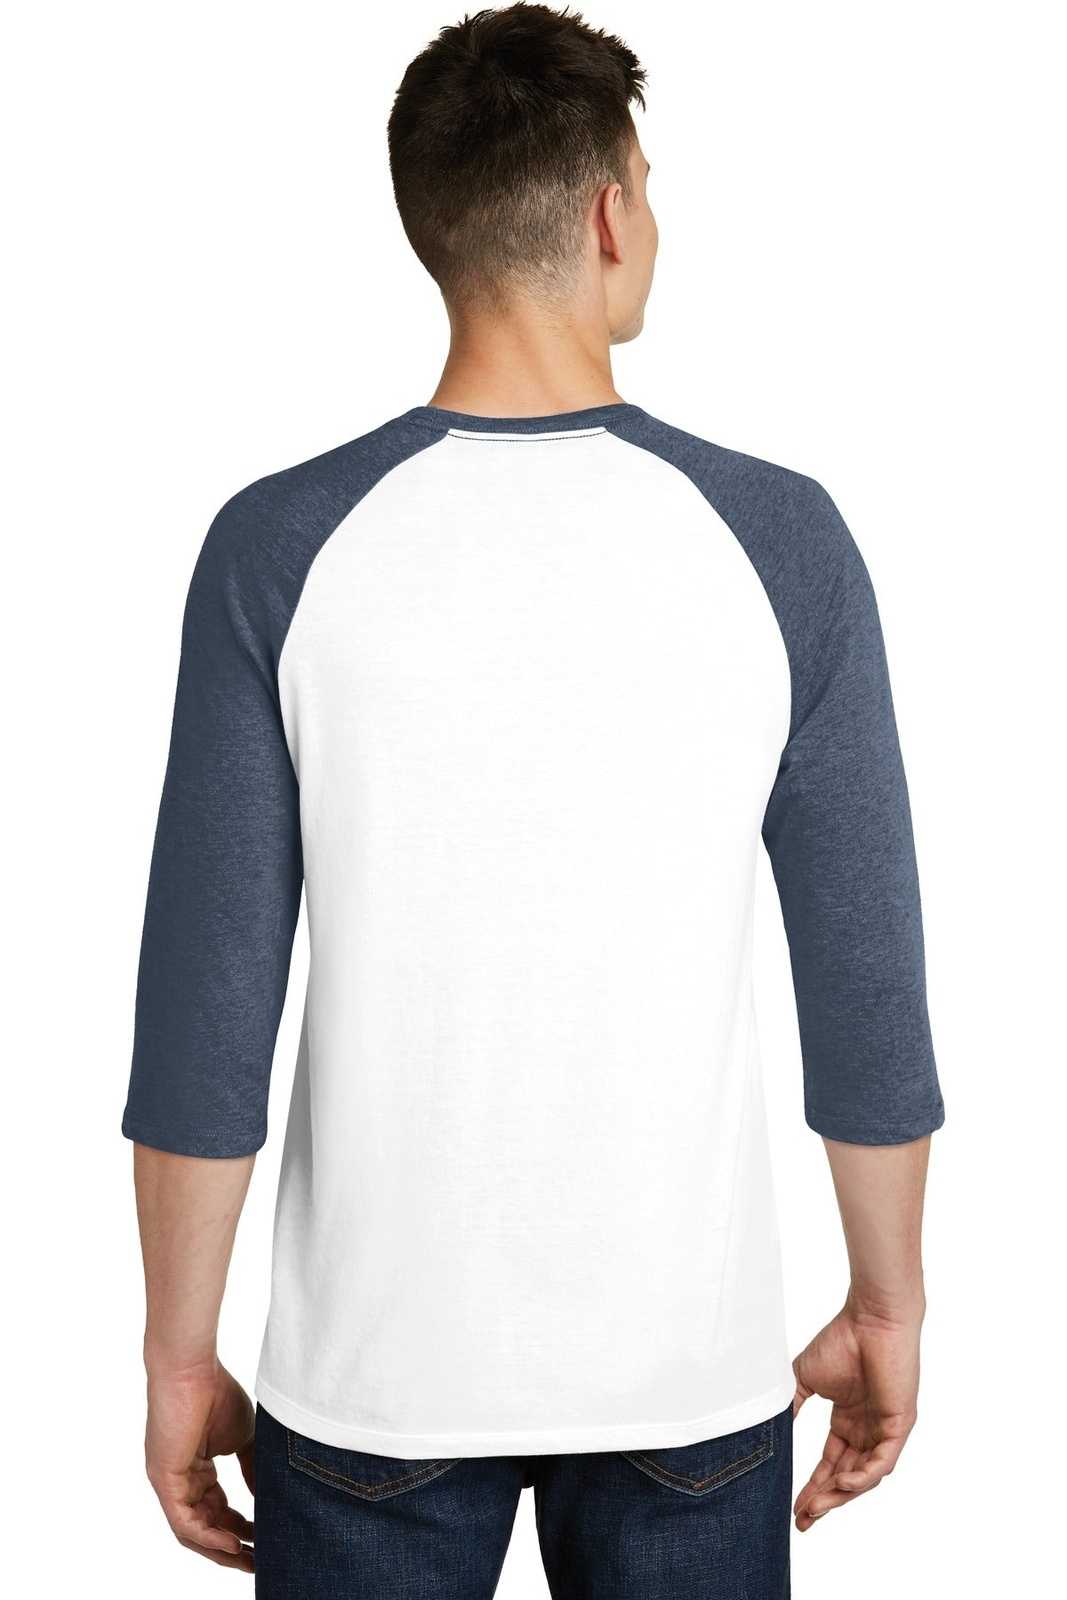 District DT6210 Very Important Tee 3/4-Sleeve Raglan - Heathered Navy White - HIT a Double - 2